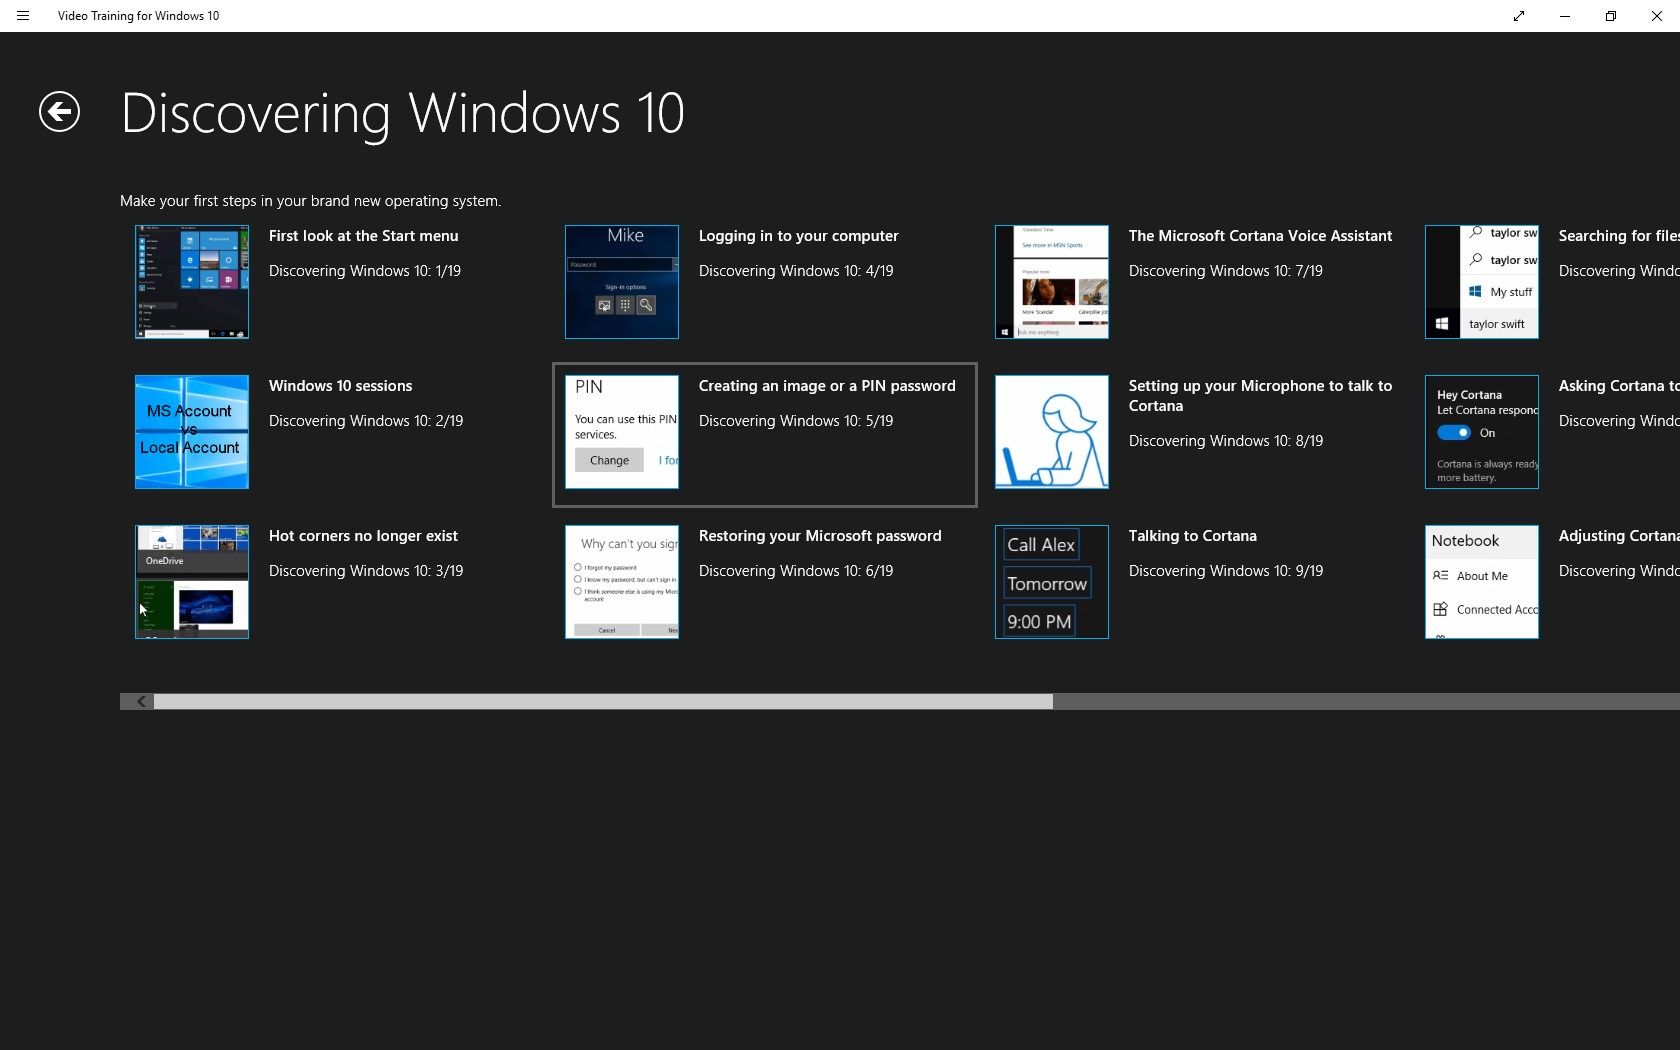 Topics available in the "Discovering Windows 10" section